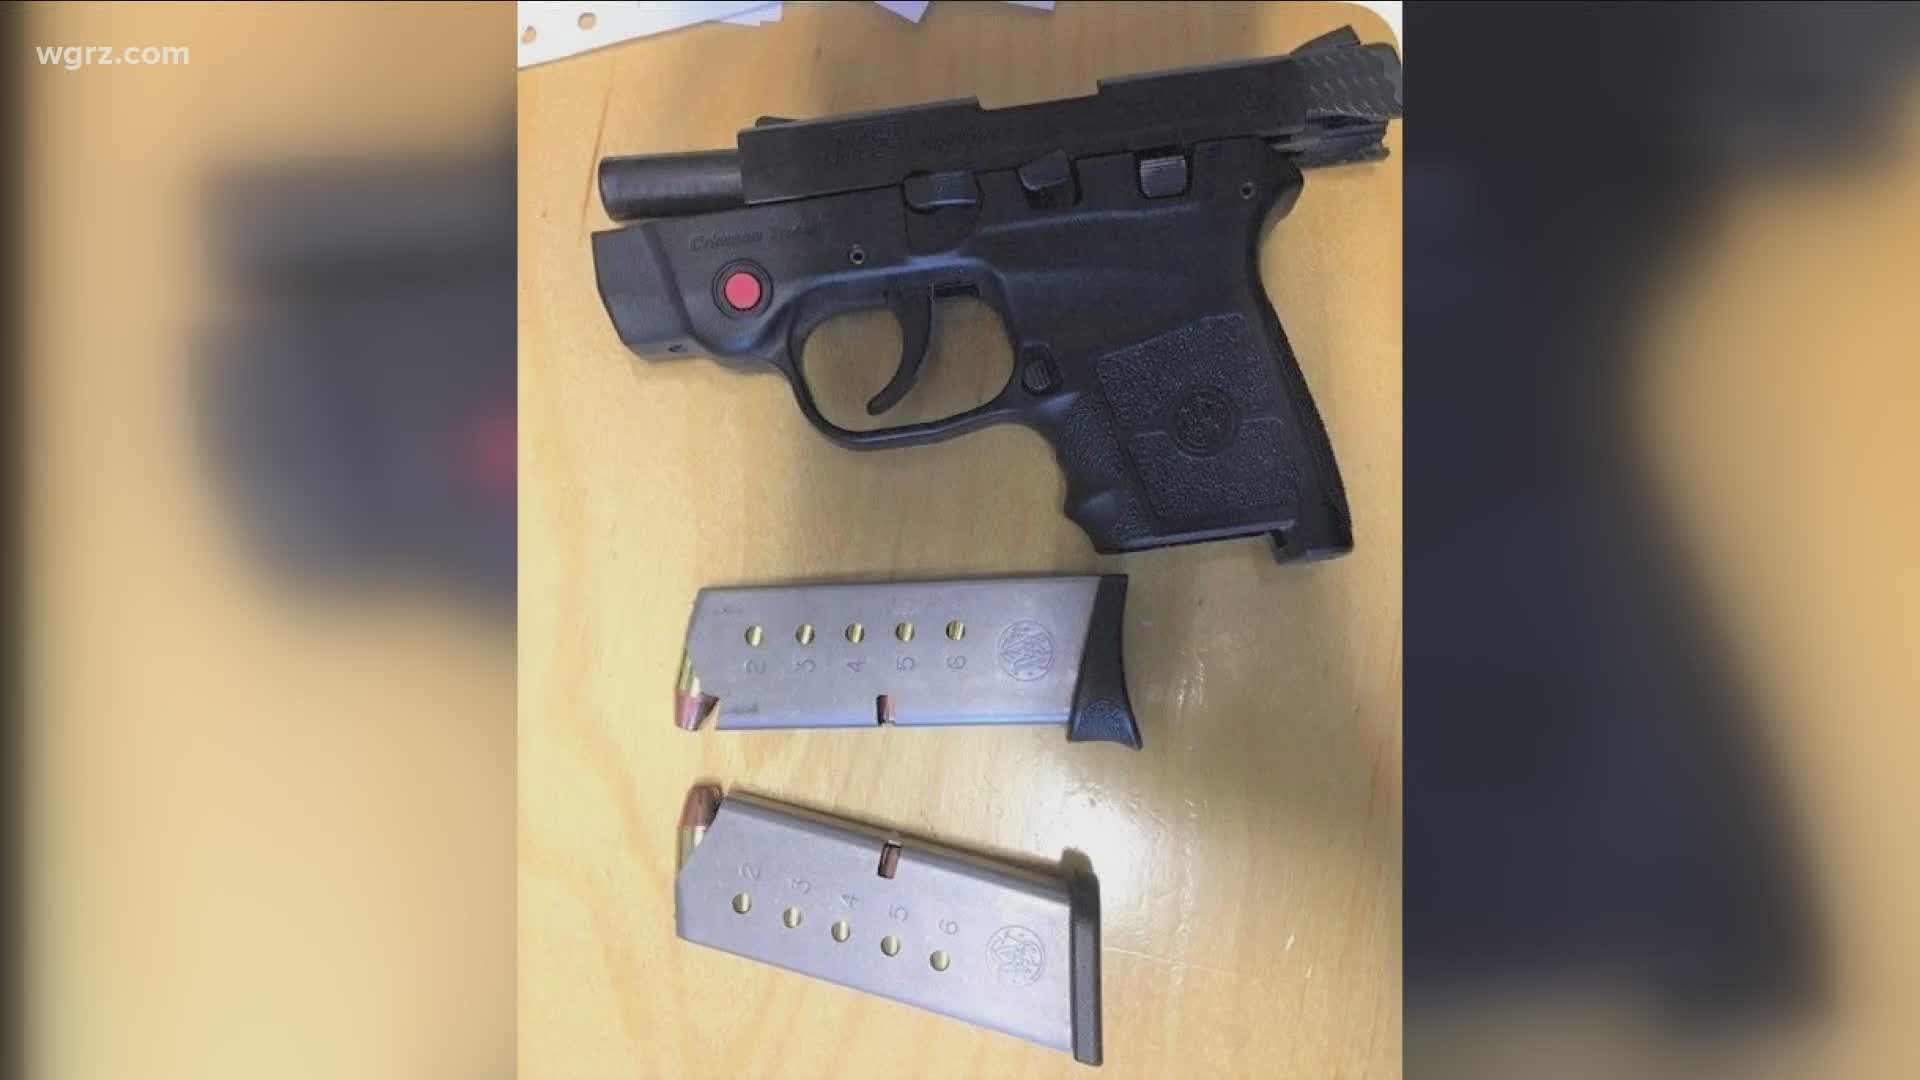 T-s-a officials say the woman was at Philadelphia International Airport Saturday when they found the gun as she went through the x-ray checkpoint.